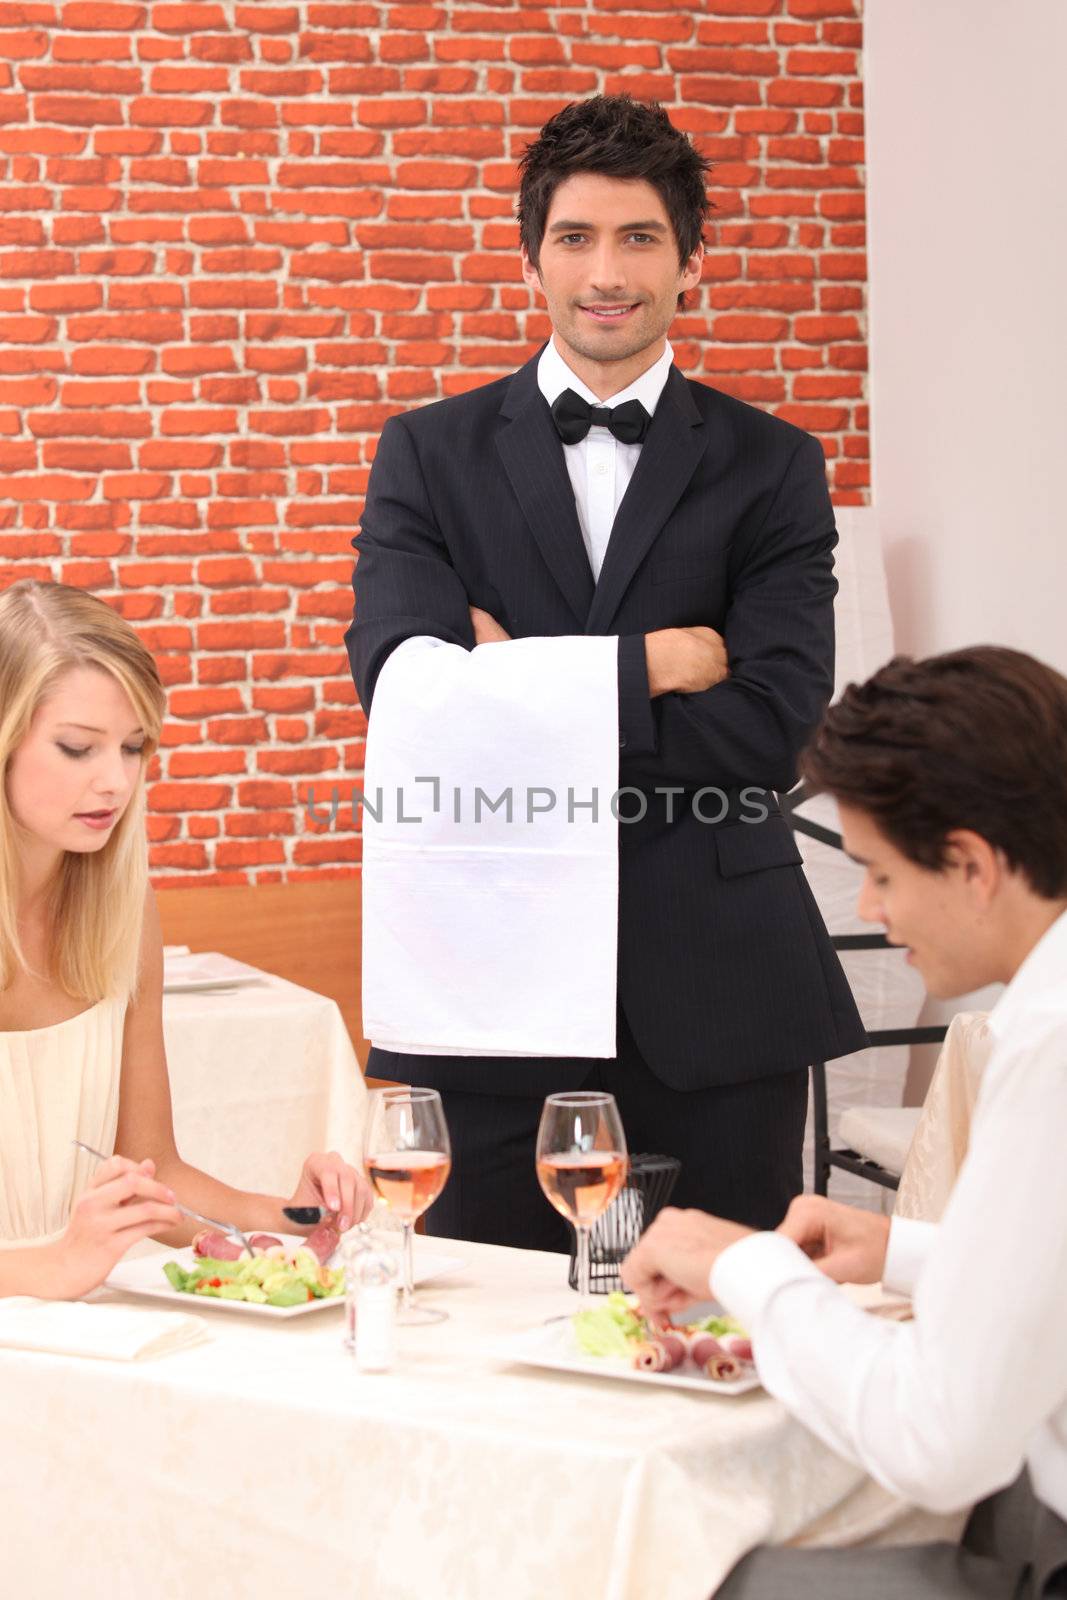 Waiter stood by couple enjoying meal by phovoir